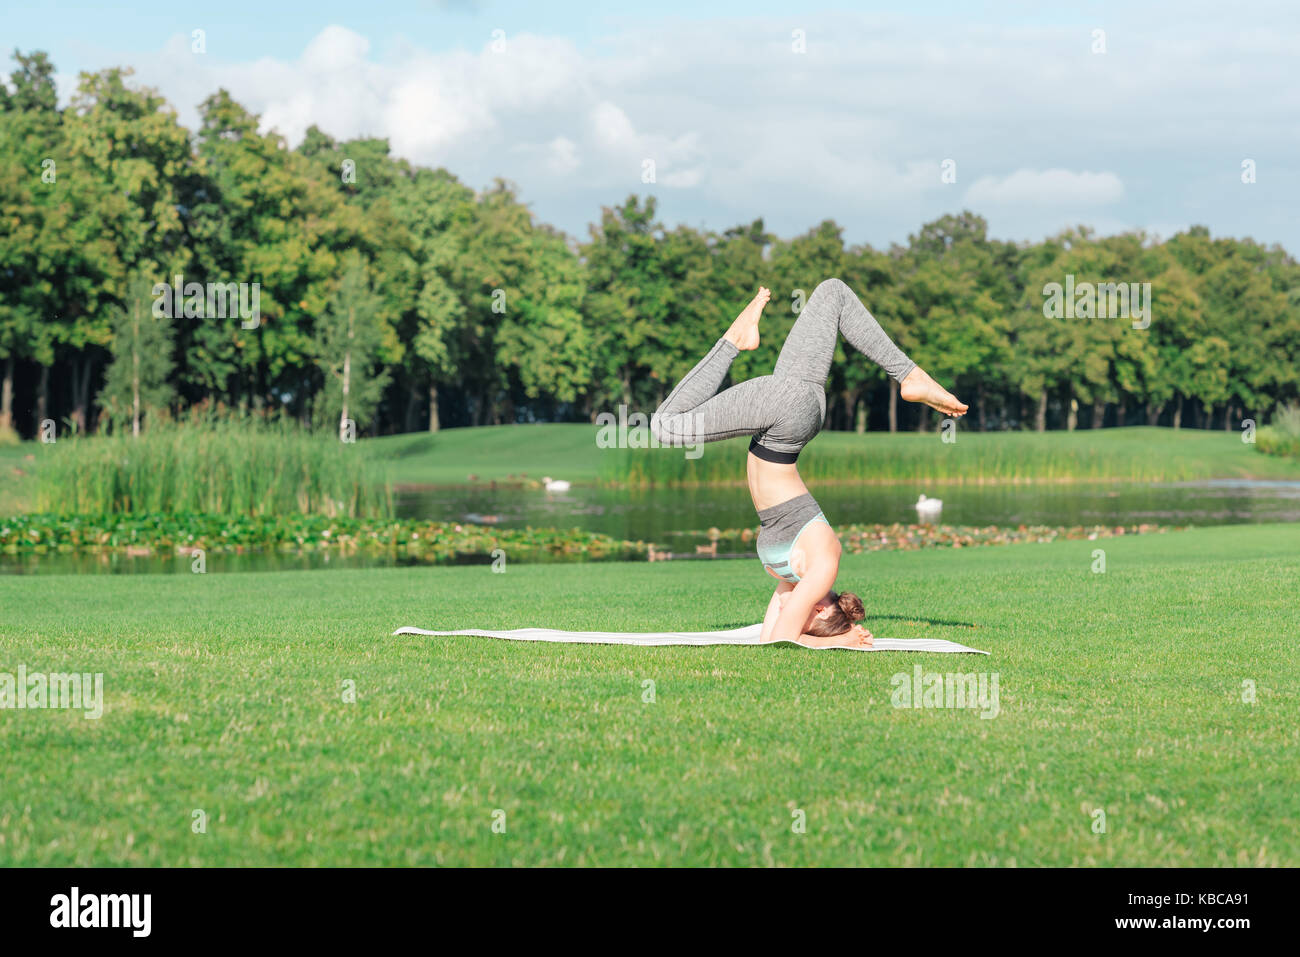 woman performing yoga headstand pose Stock Photo